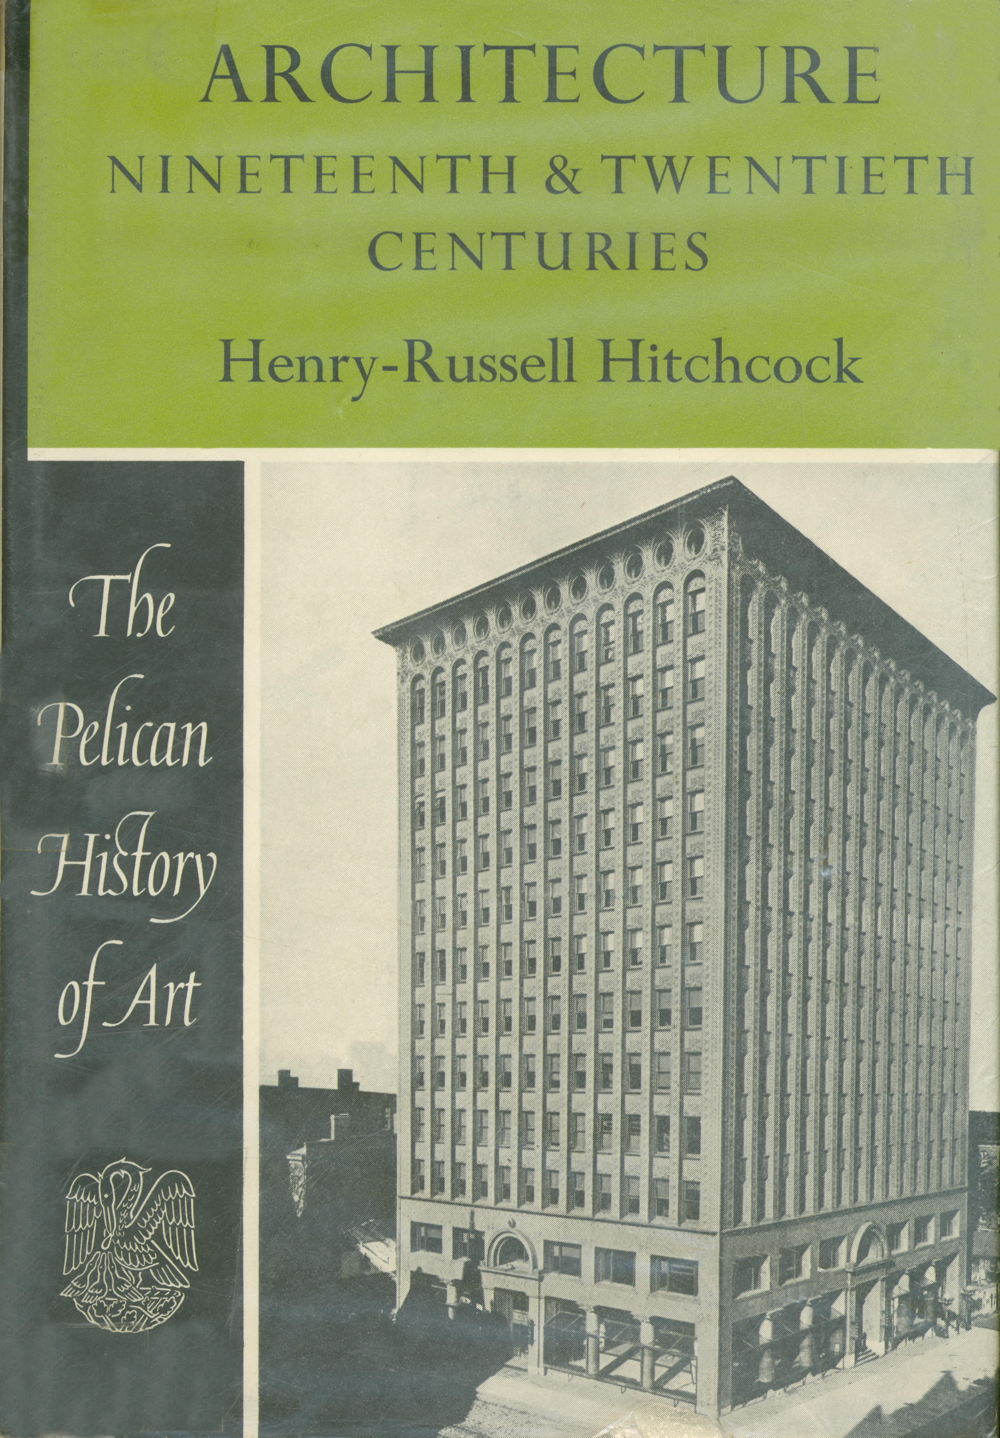 Architecture Nineteenth and Twentieth Centuries Henry-Russell Hitchcock